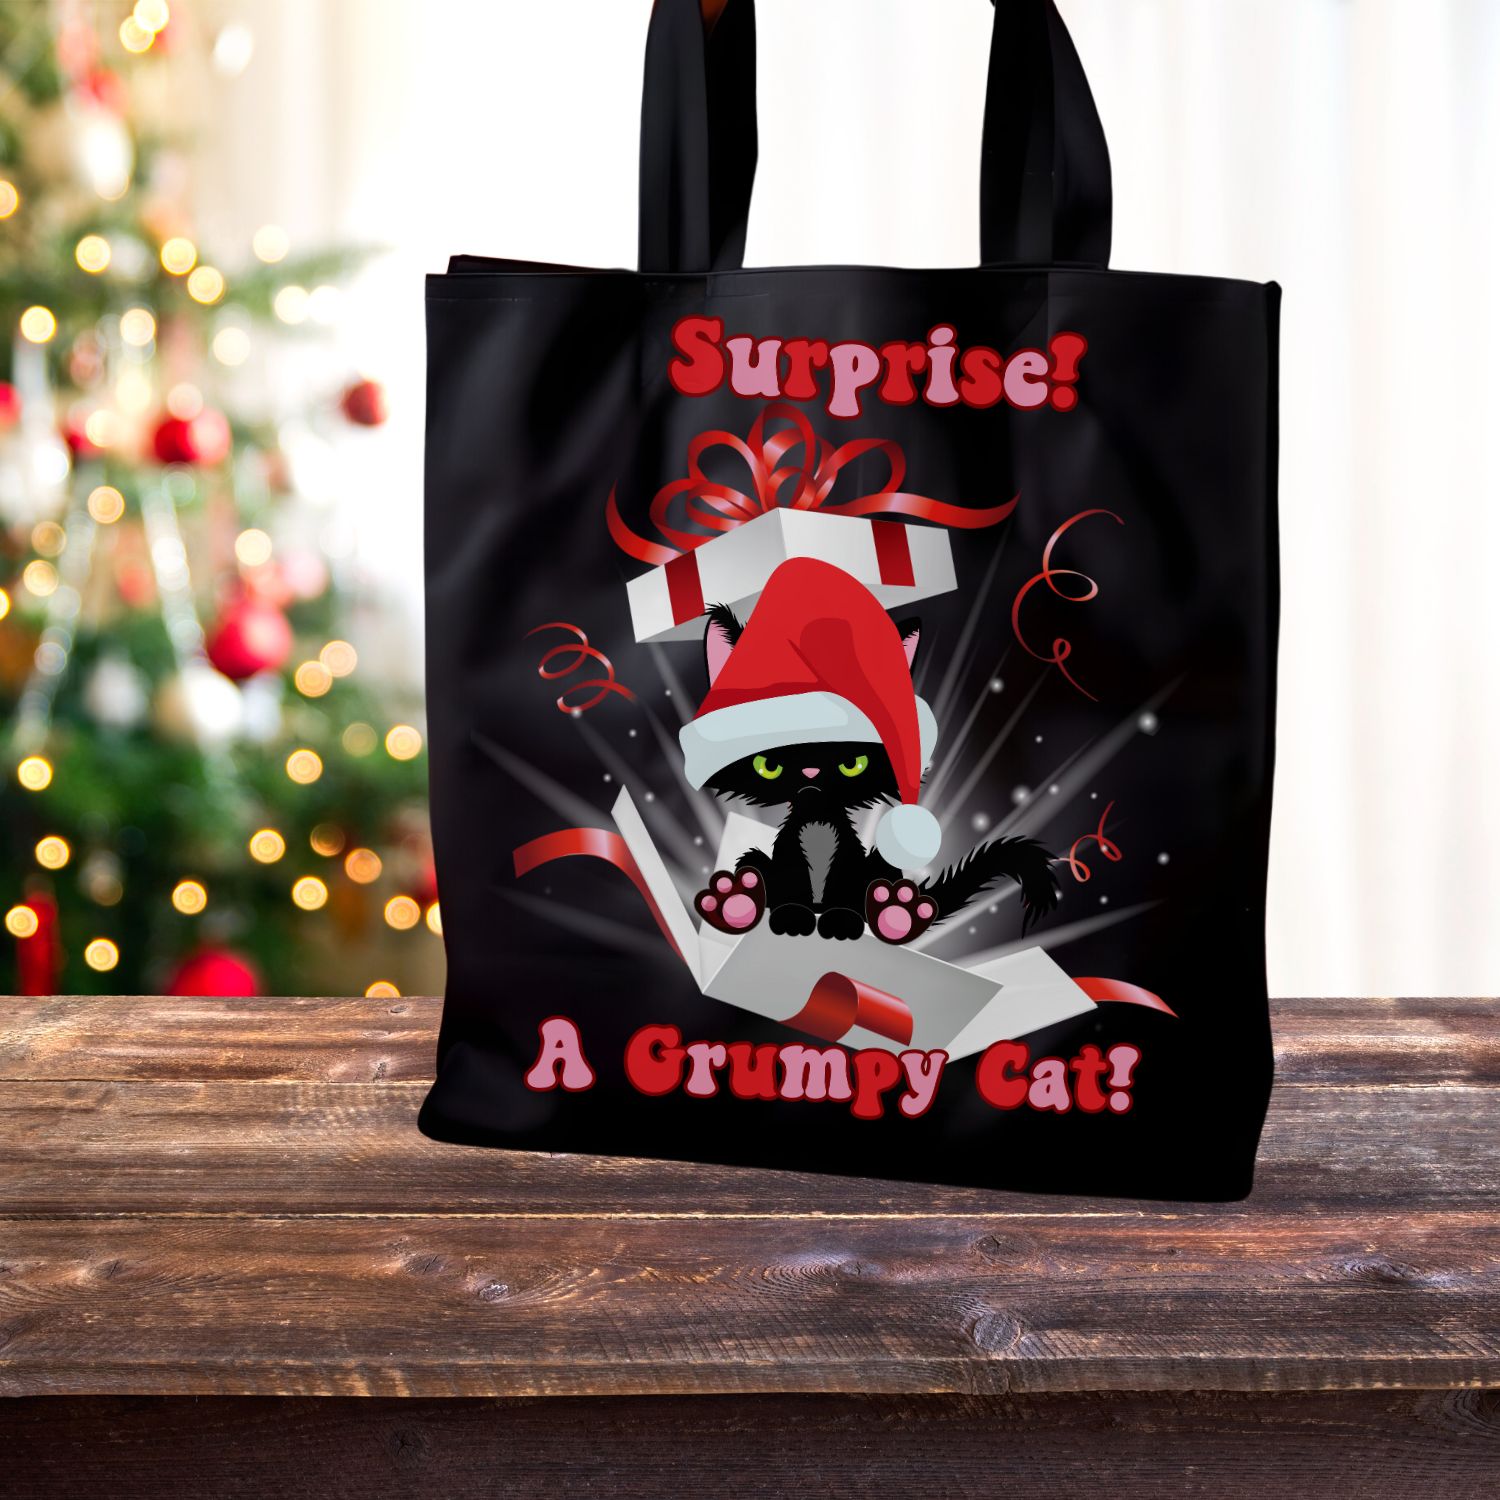 Meowy Catmas Tote Bag - Funny Black Cat Totes, Christmas Lights, Grumpy Cat Design Accessories   